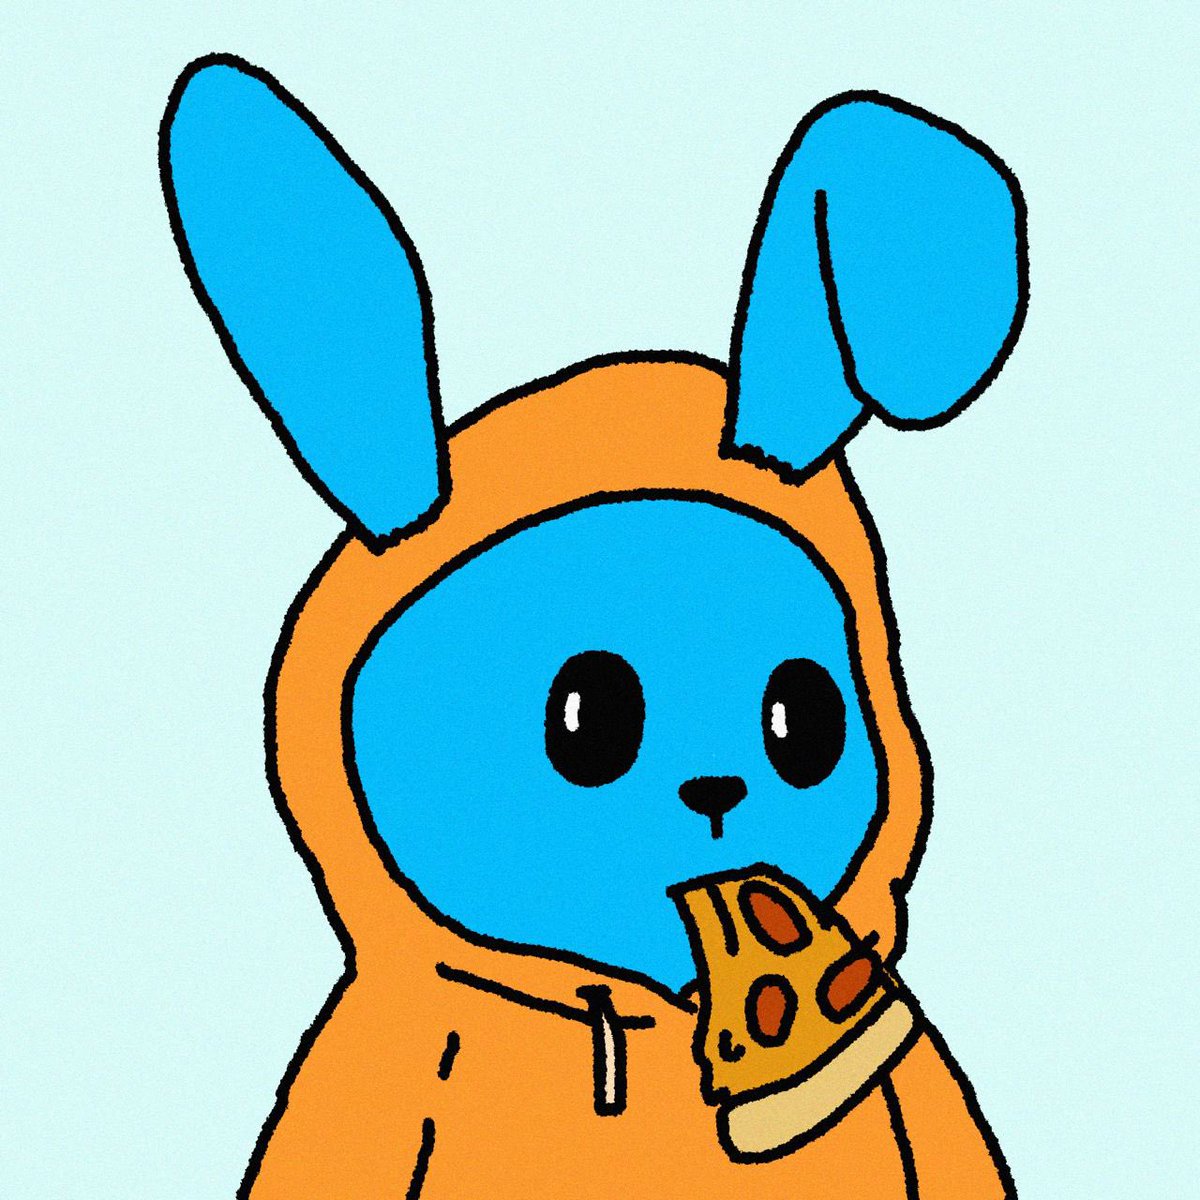 Love what @slander_eth is doing on @friendtech. Grab a key to his club and get a custom bunny pfp! Link to club in following tweet.